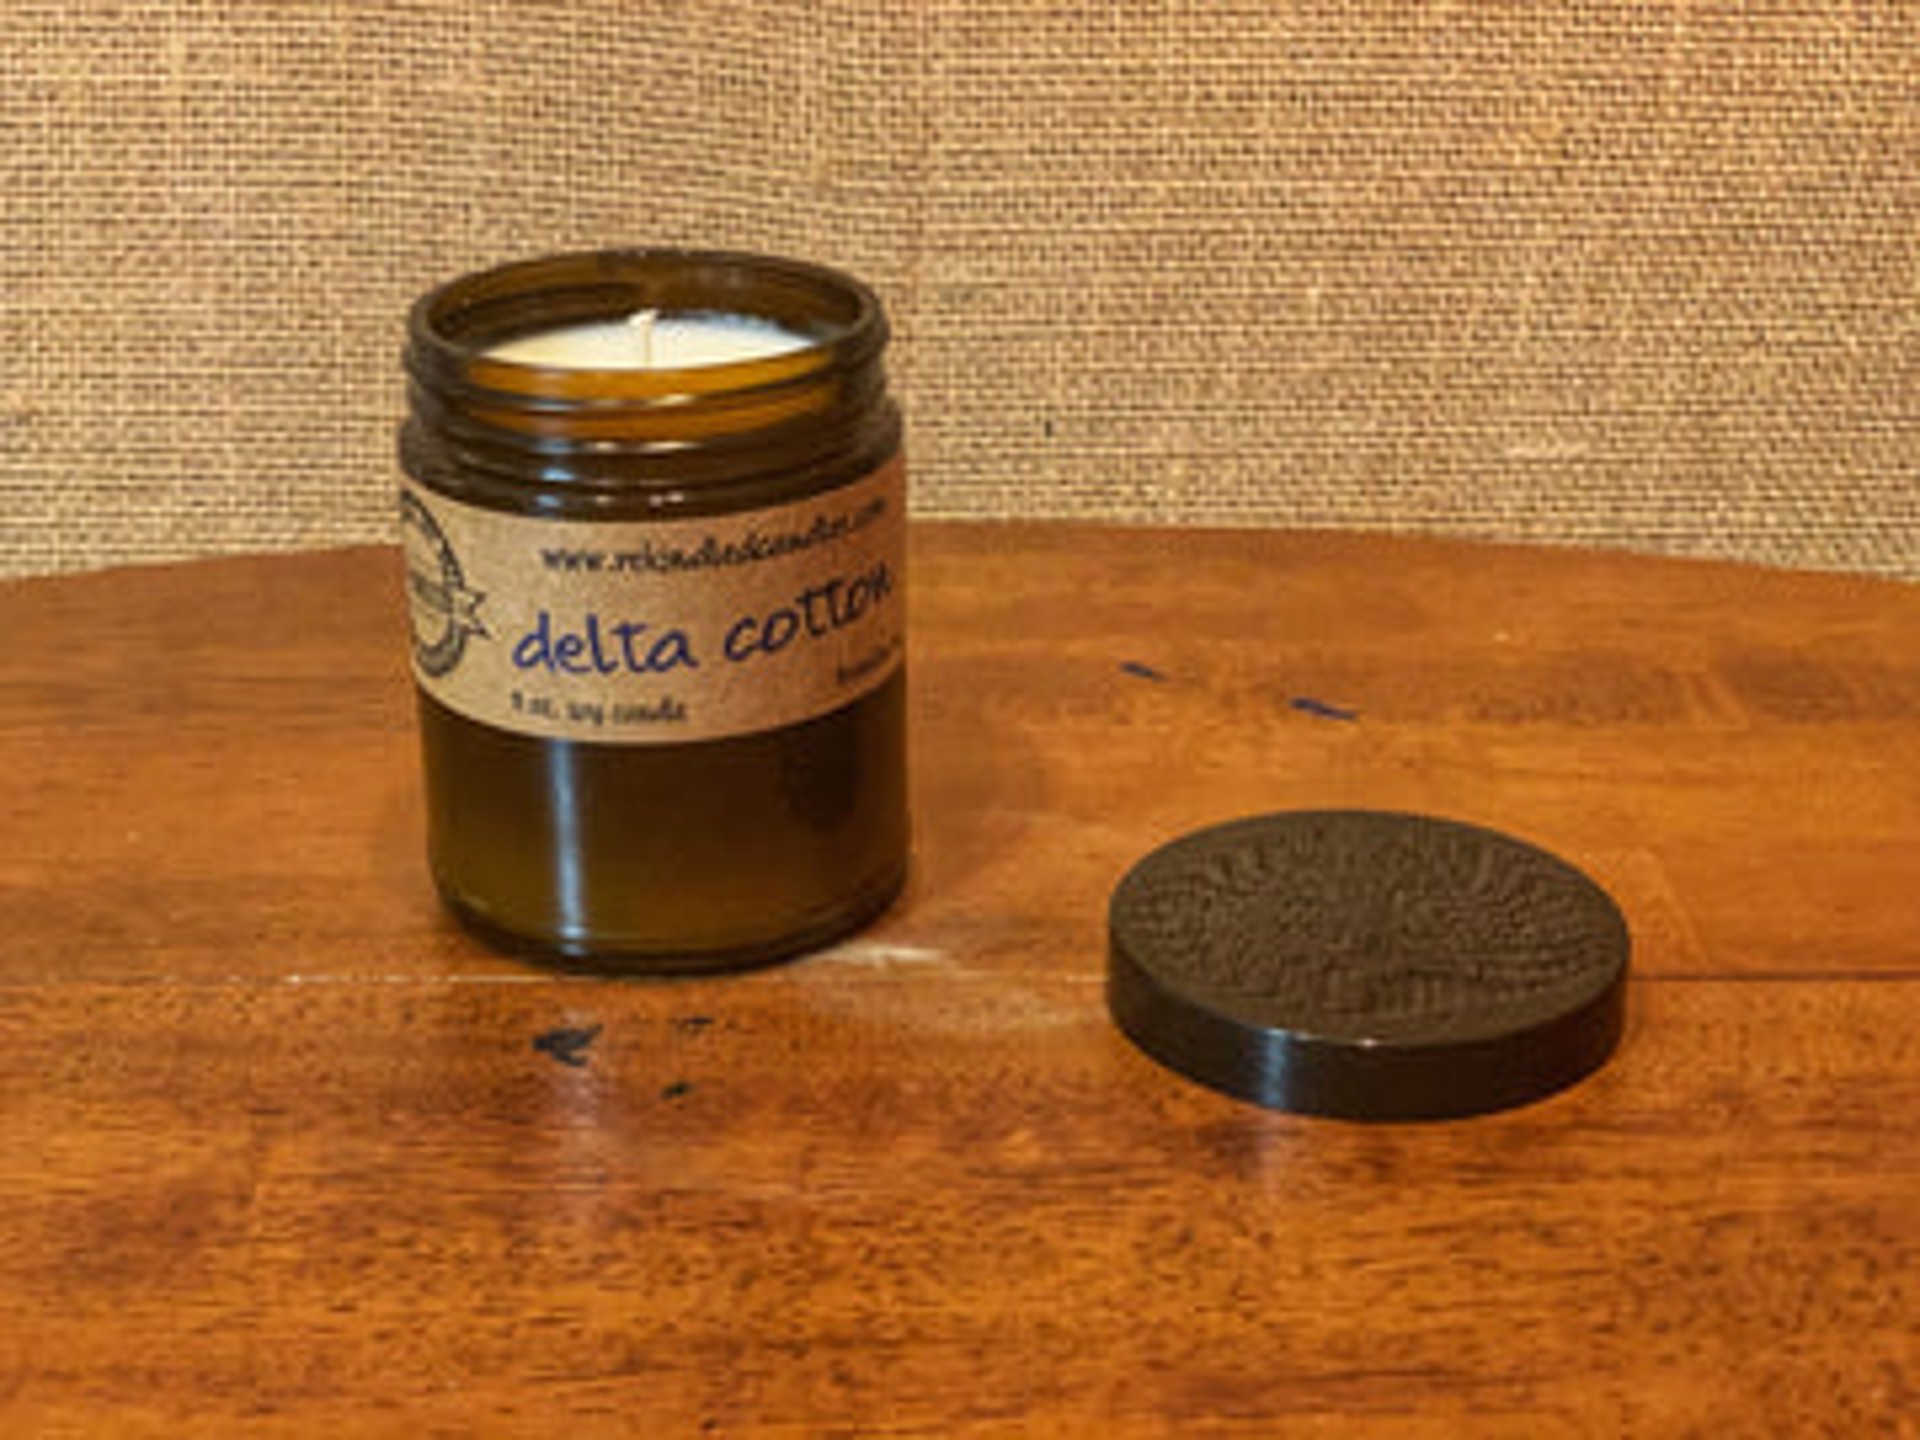 Delta Cotton Amber Jar Candle by re-kindled candle company